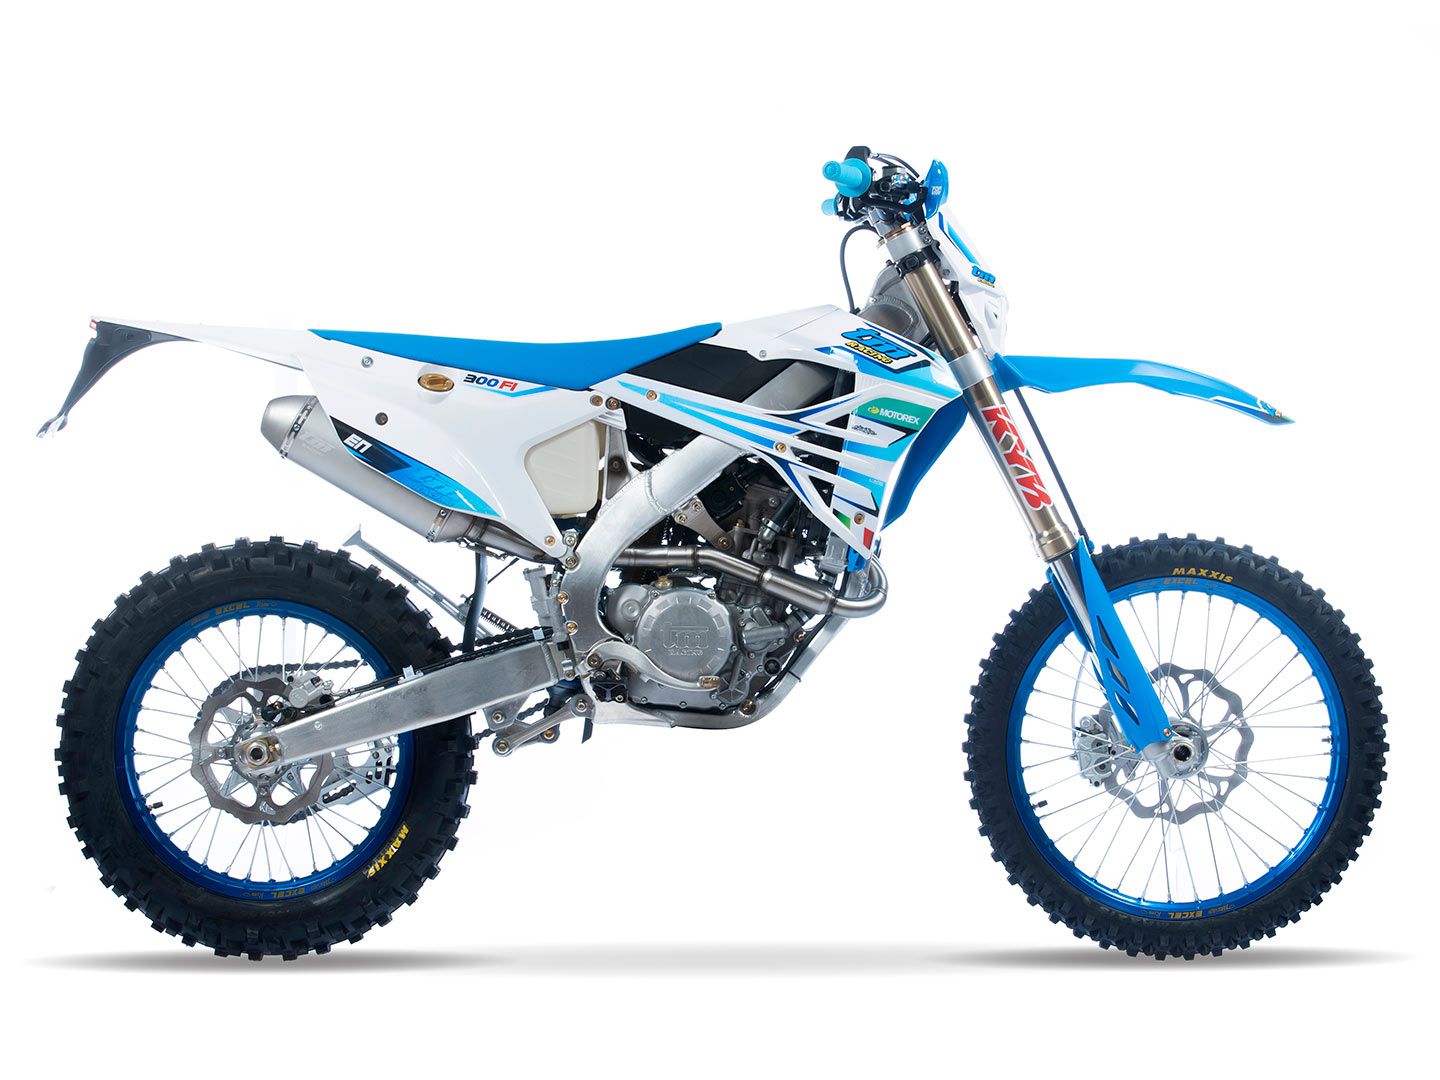 The TM EN 300 Fi 4T’s MSRP surpasses that of TM's two- and four-stroke motocross and enduro dirt bikes.